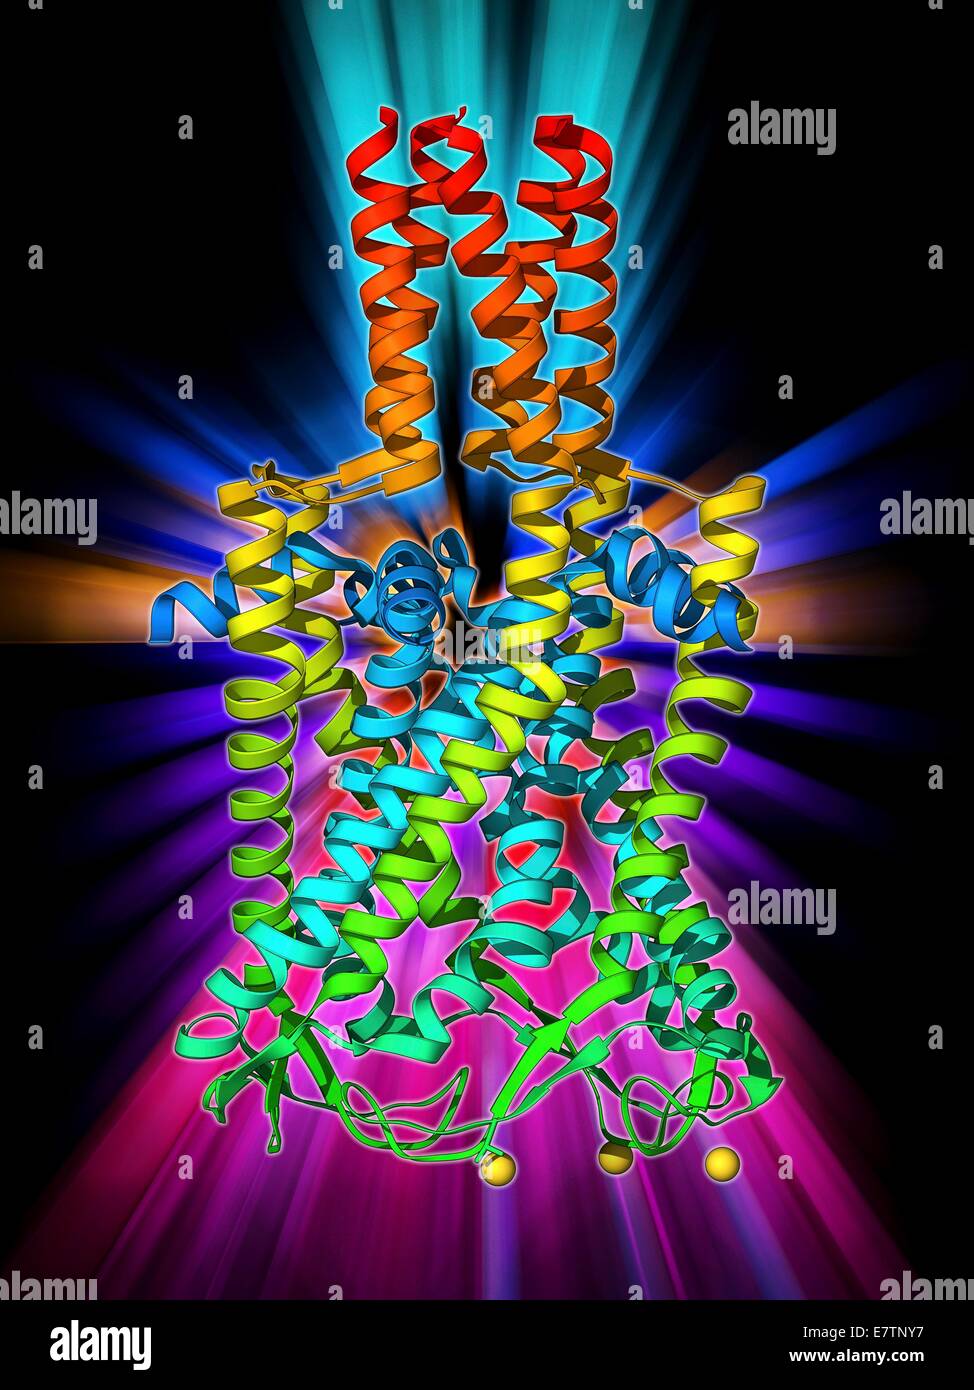 MscL ion channel protein structure. Molecular model of a mechanosensitive channel of large conductance (MscL) from a Mycobacterium tuberculosis bacterium. MscLs play a critical role in converting physical stress at the cell membrane into an electrochemica Stock Photo